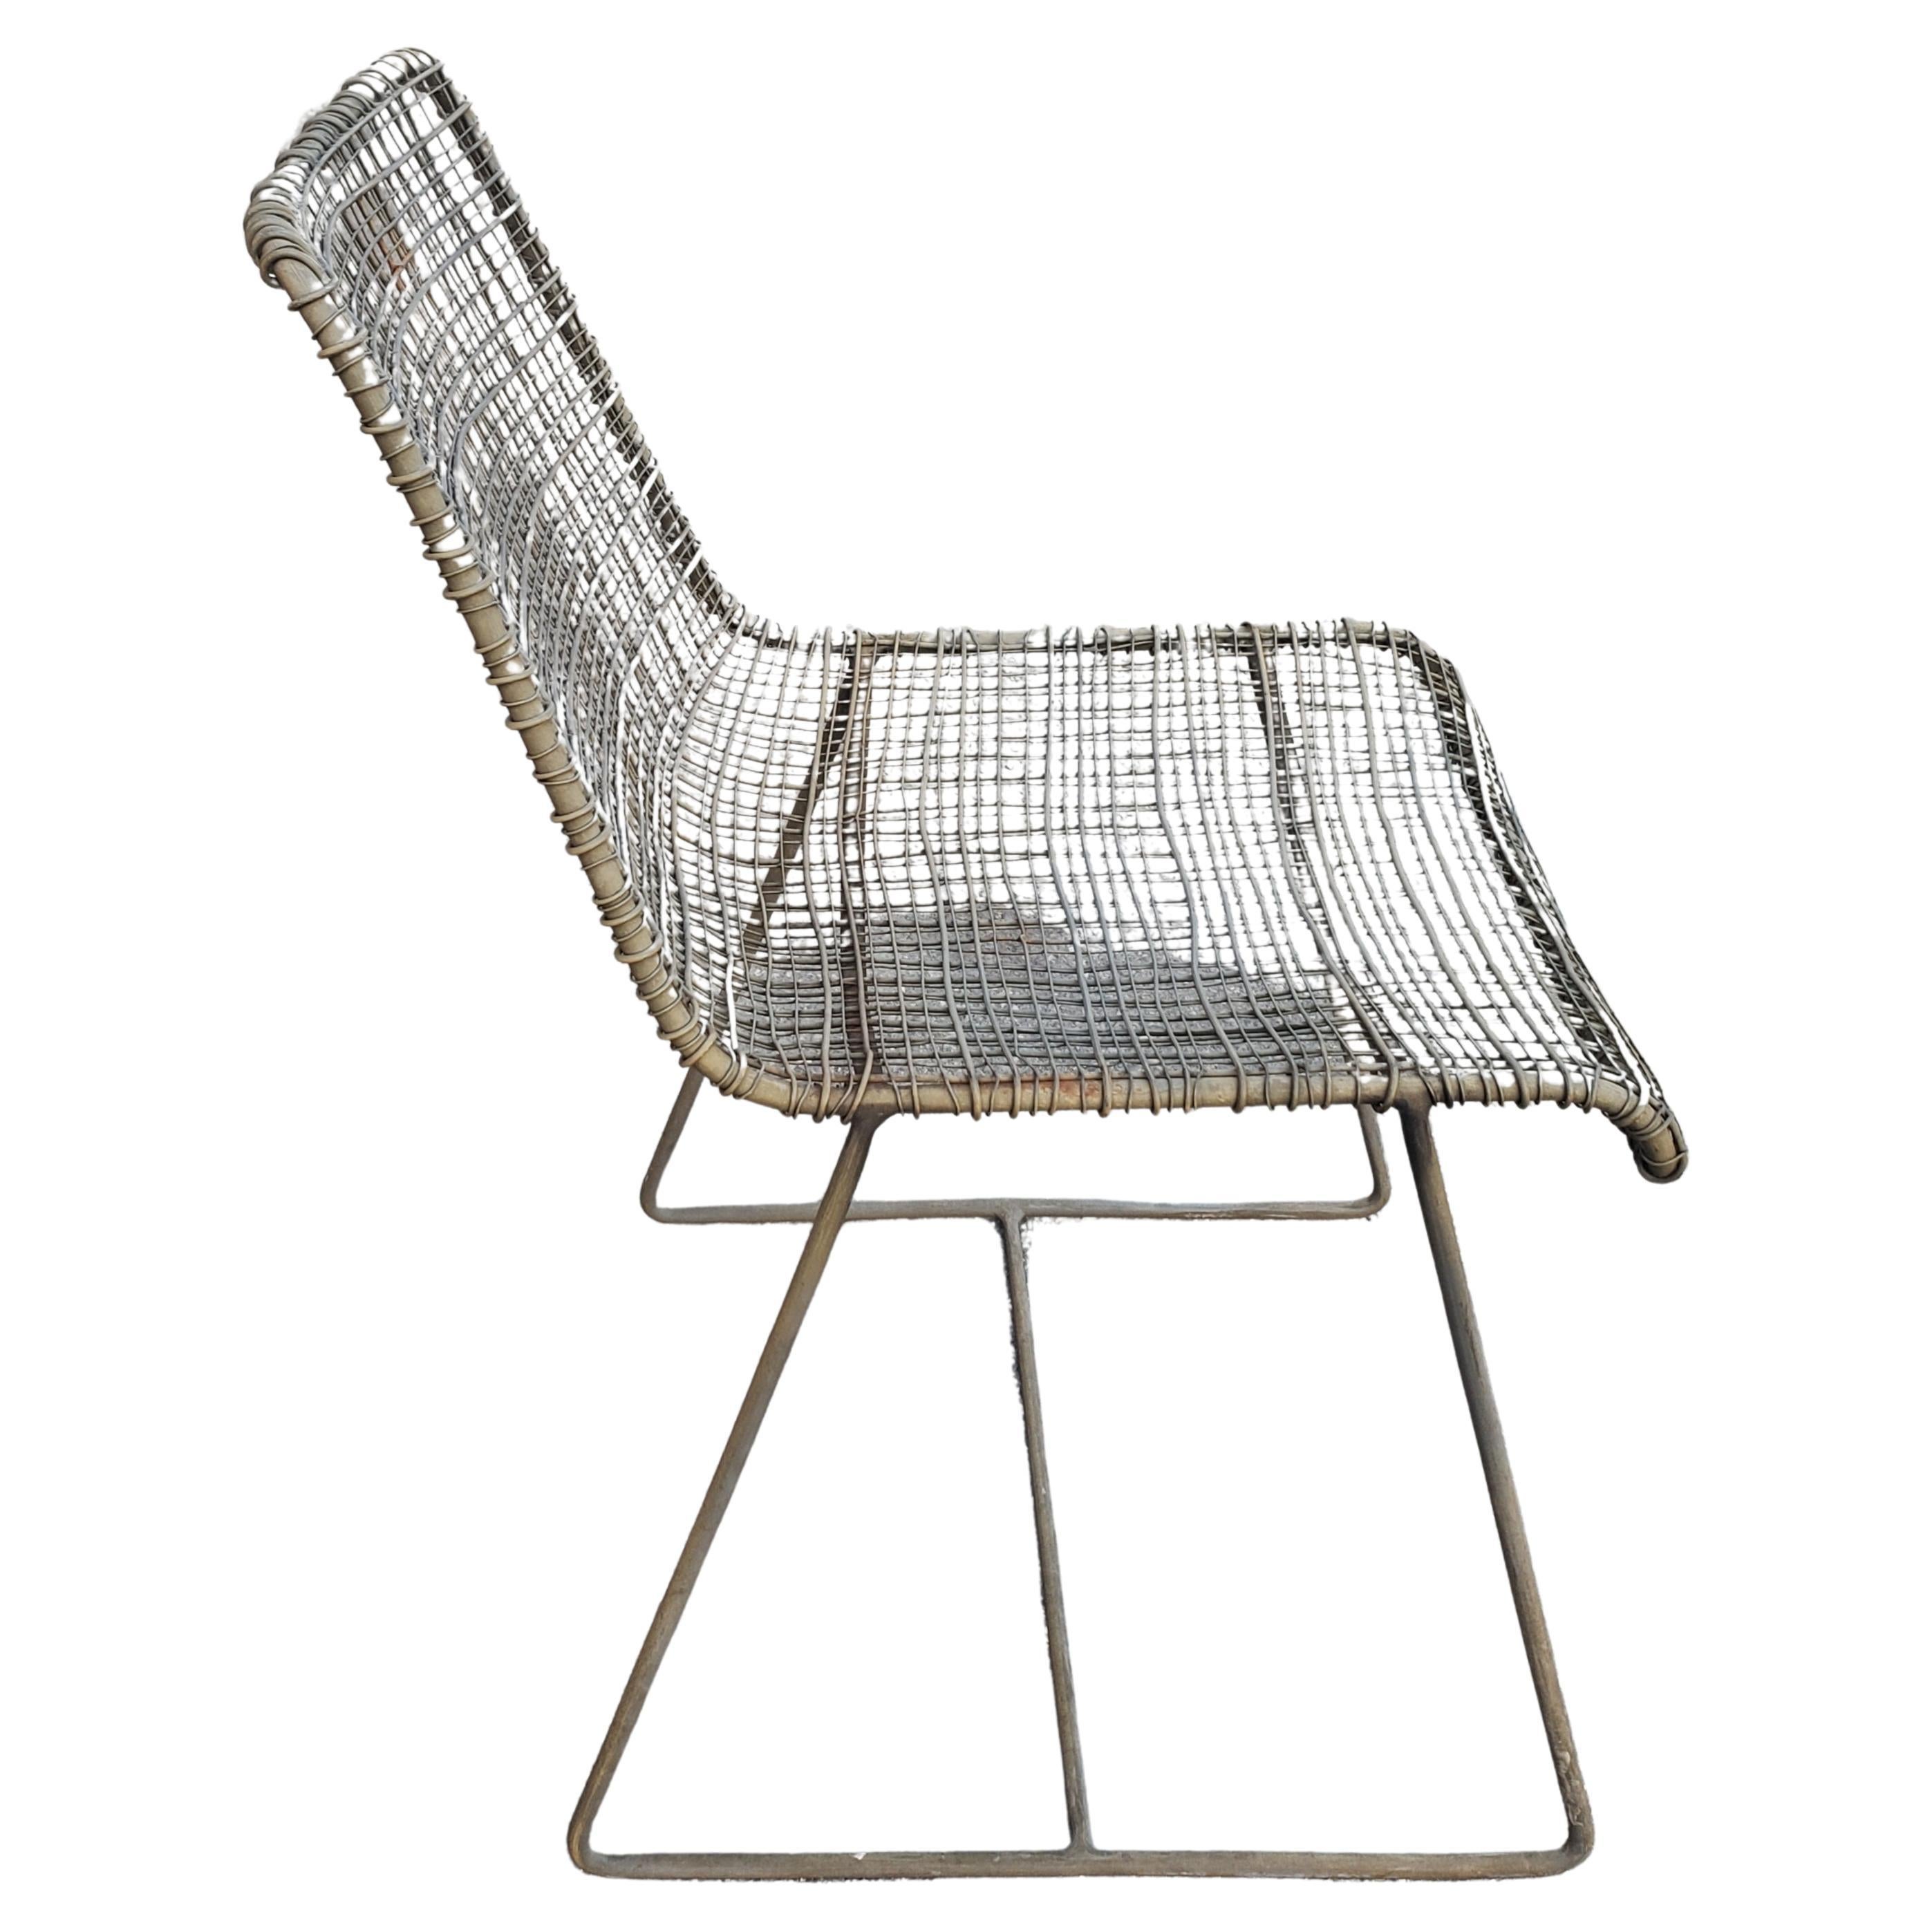 Metalwork 1970s Slope Wrought Iron and Steel Mesh Lounge Chairs, a Pair For Sale